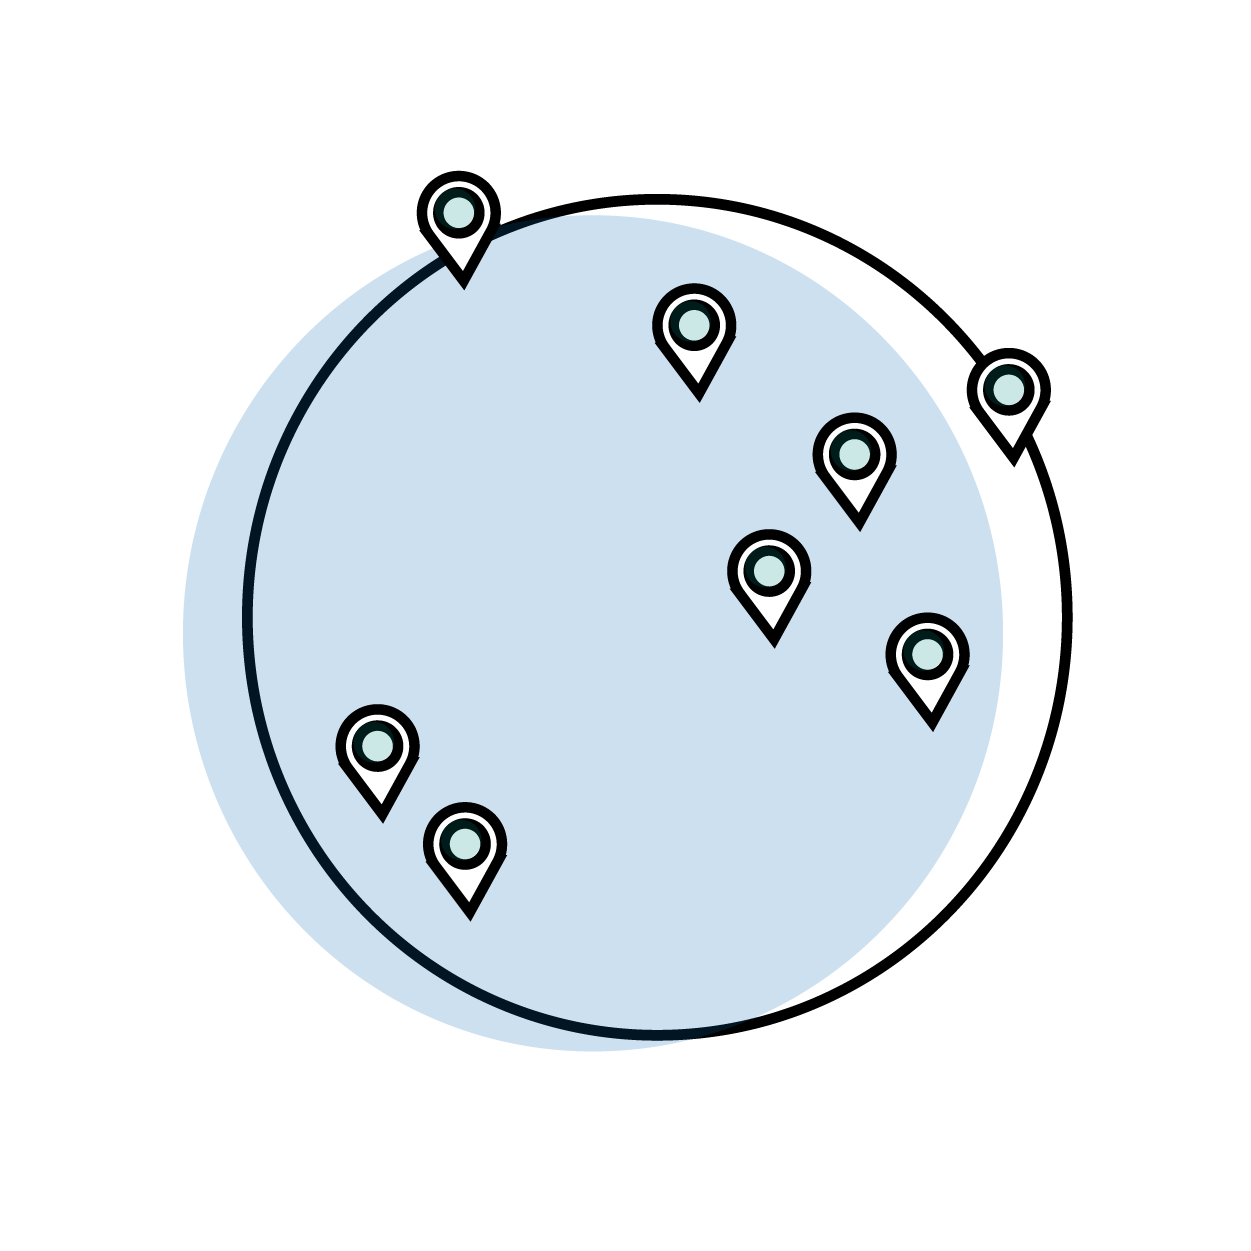 Globe with map pins illustration